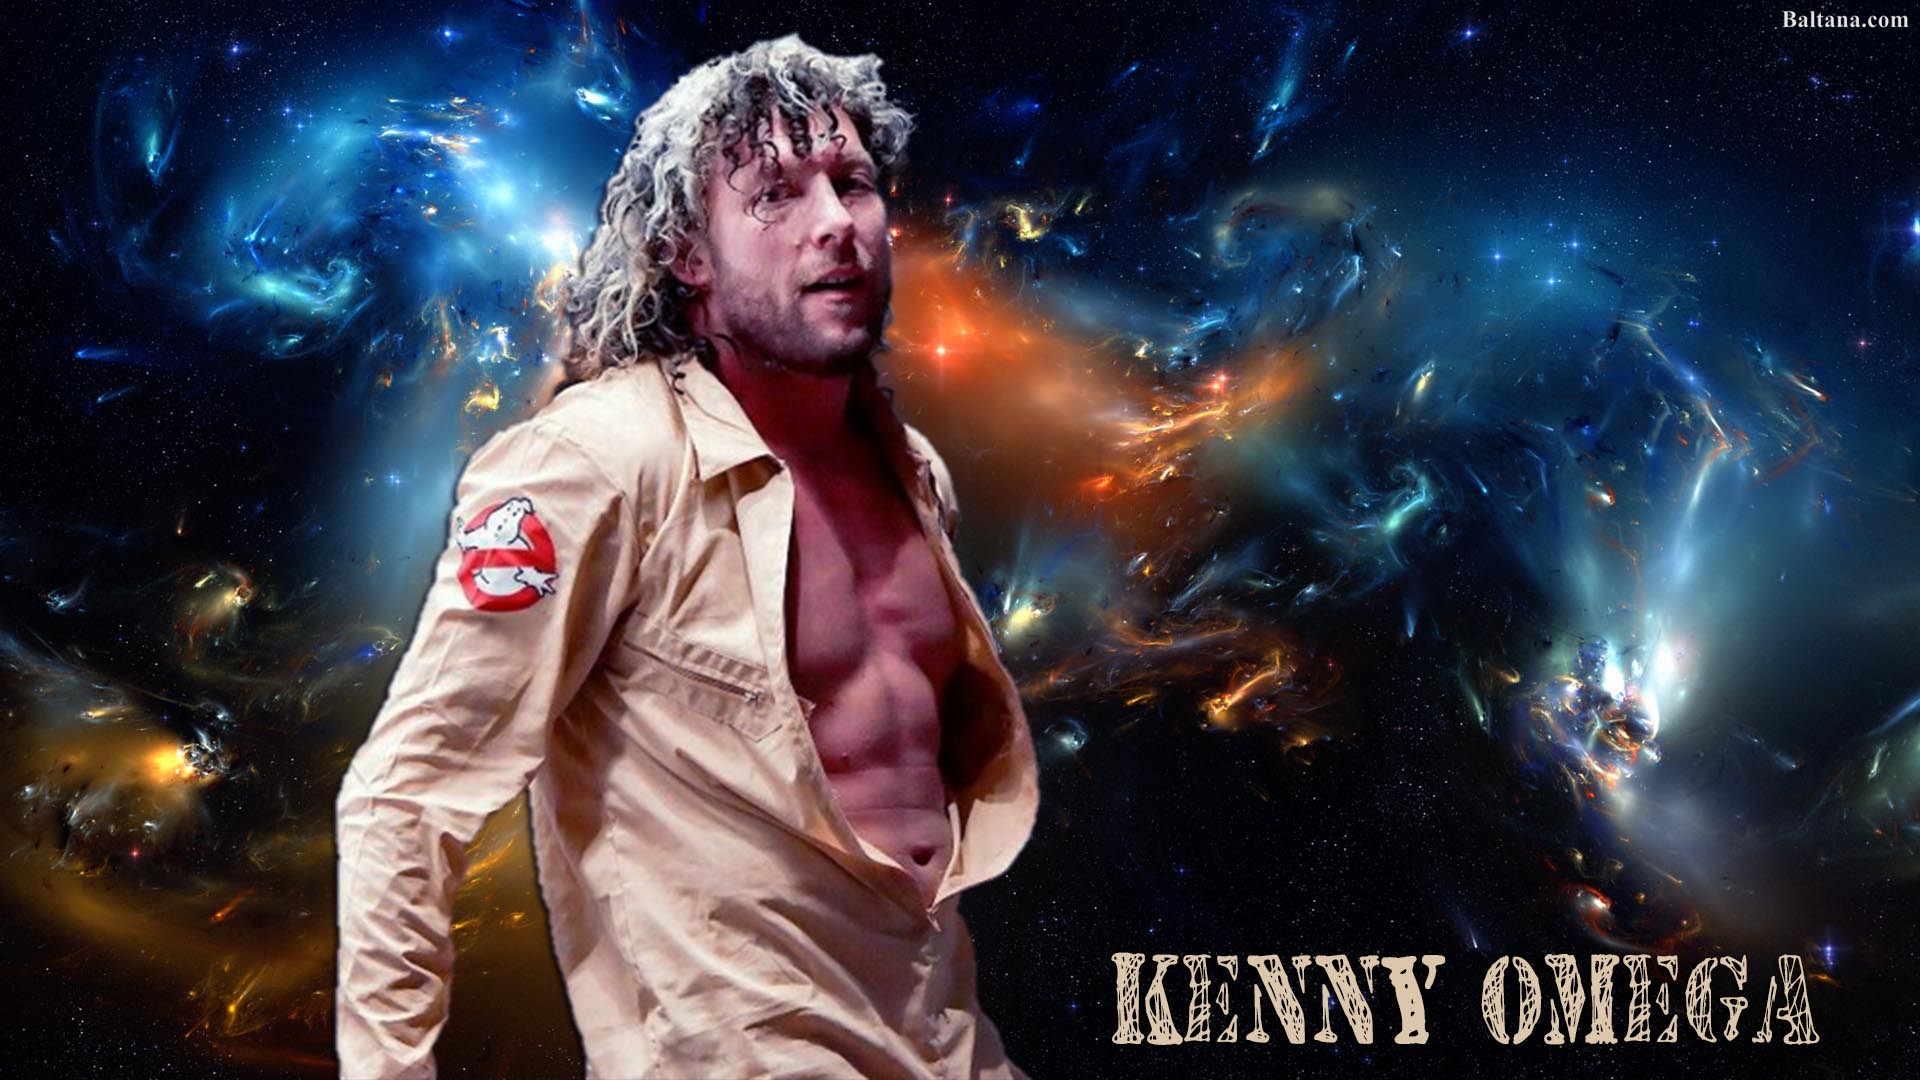 Kenny Omega Widescreen Wallpapers.